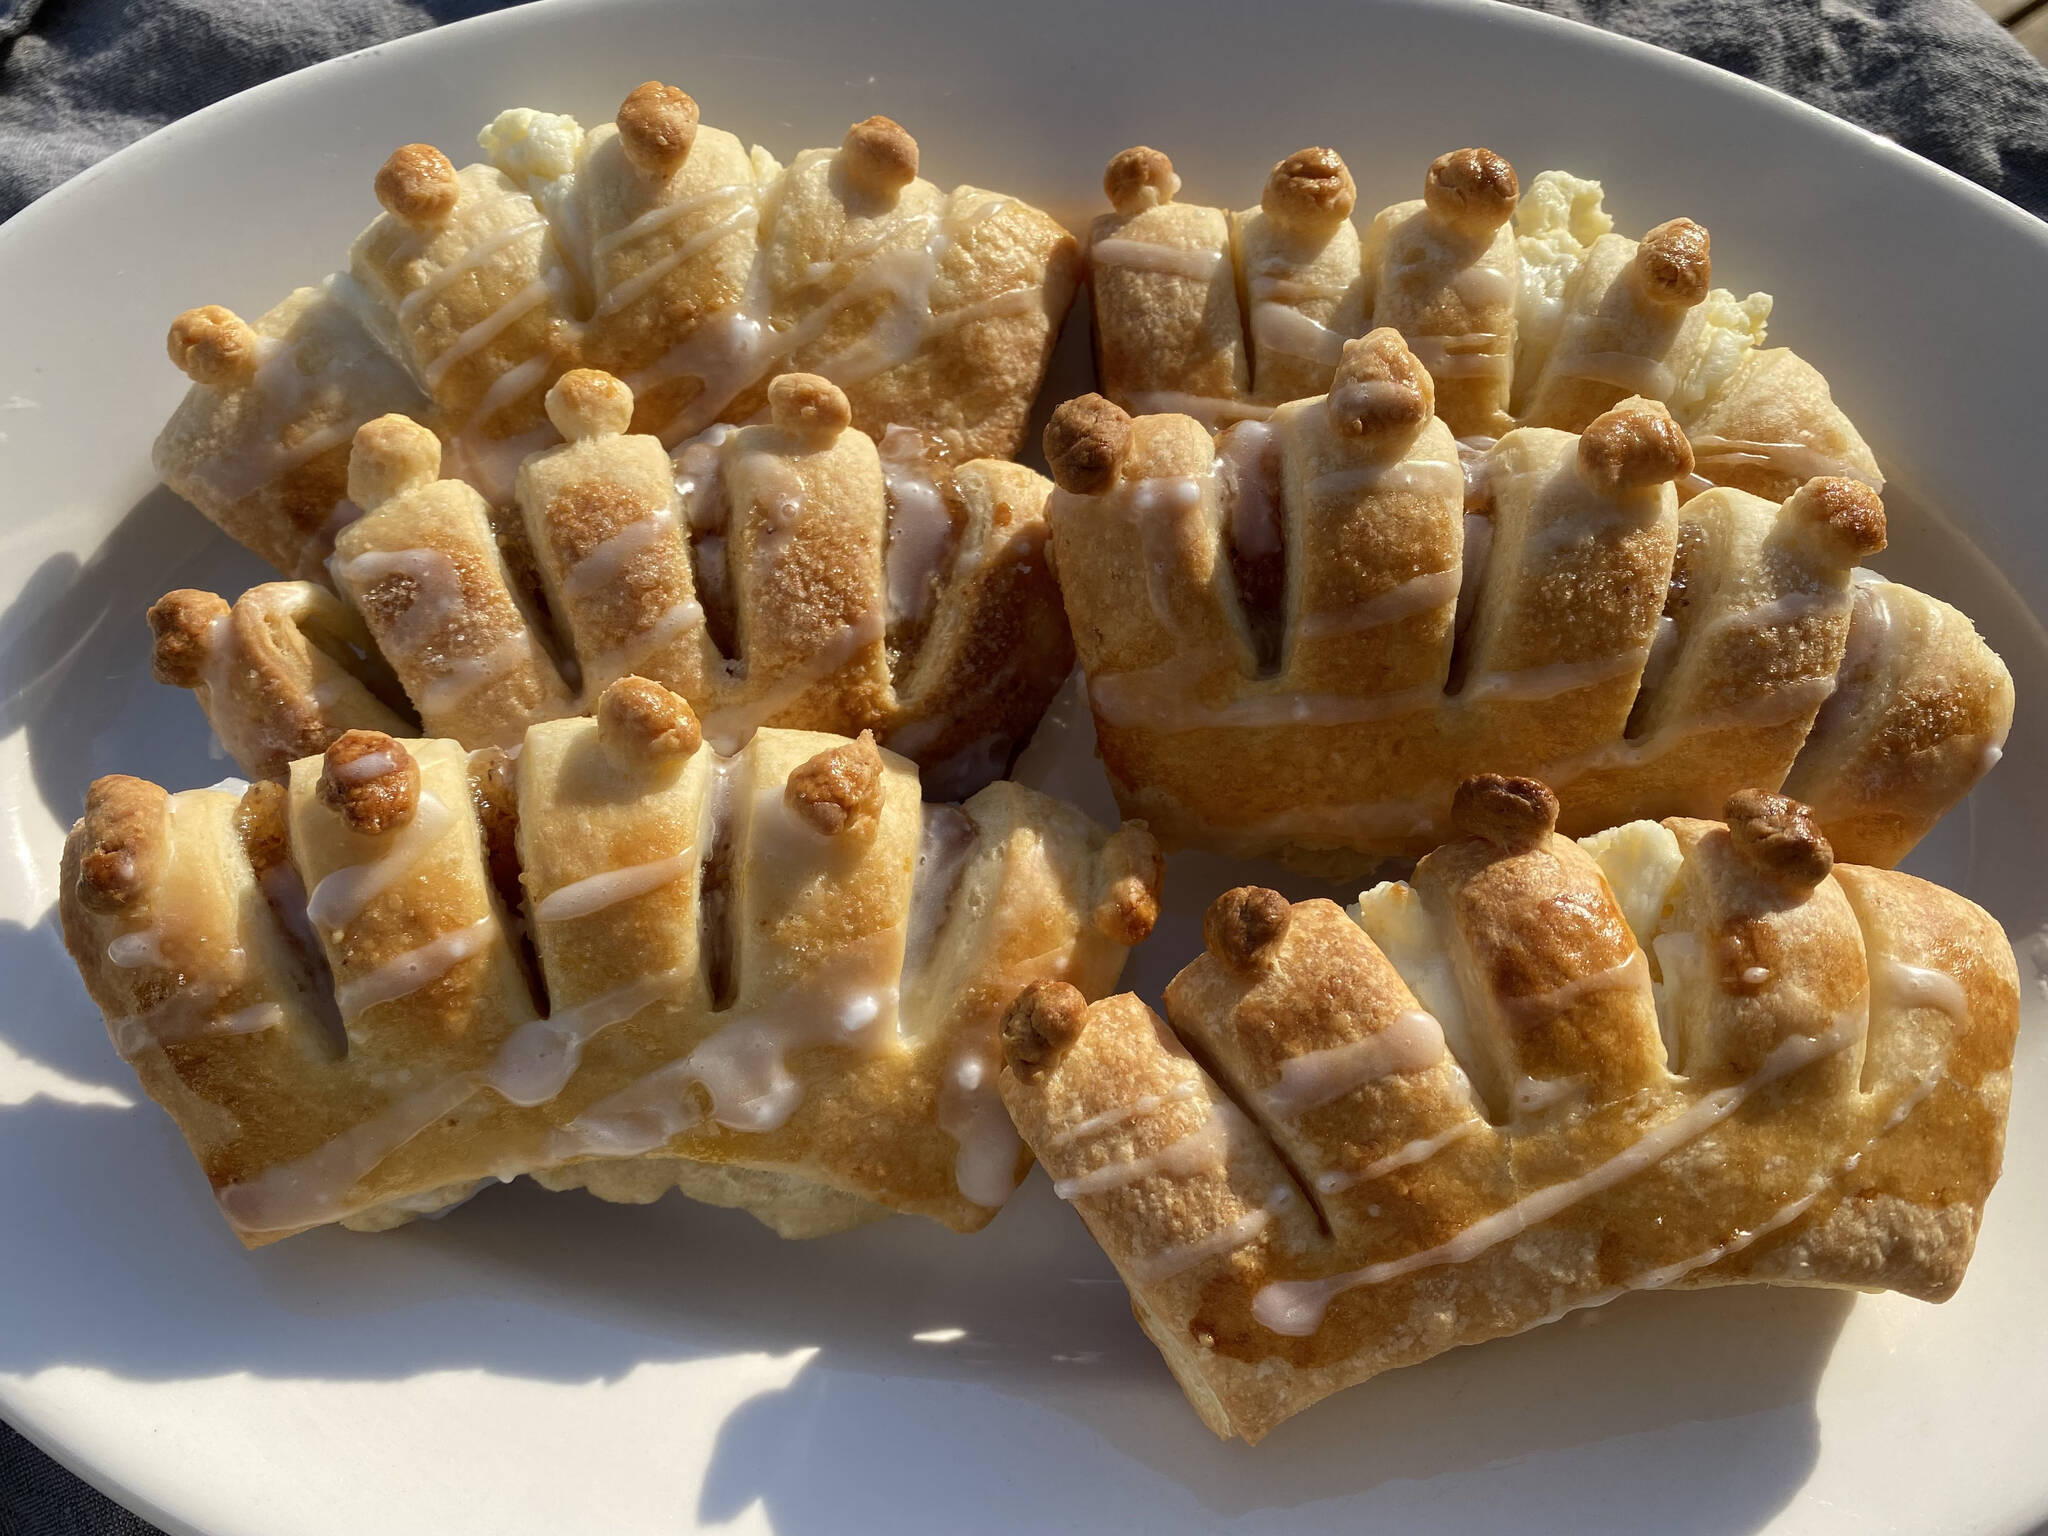 Buttery bear claws are filled with almond paste and topped with sugar glaze. (Photo by Tressa Dale/Peninsula Clarion)